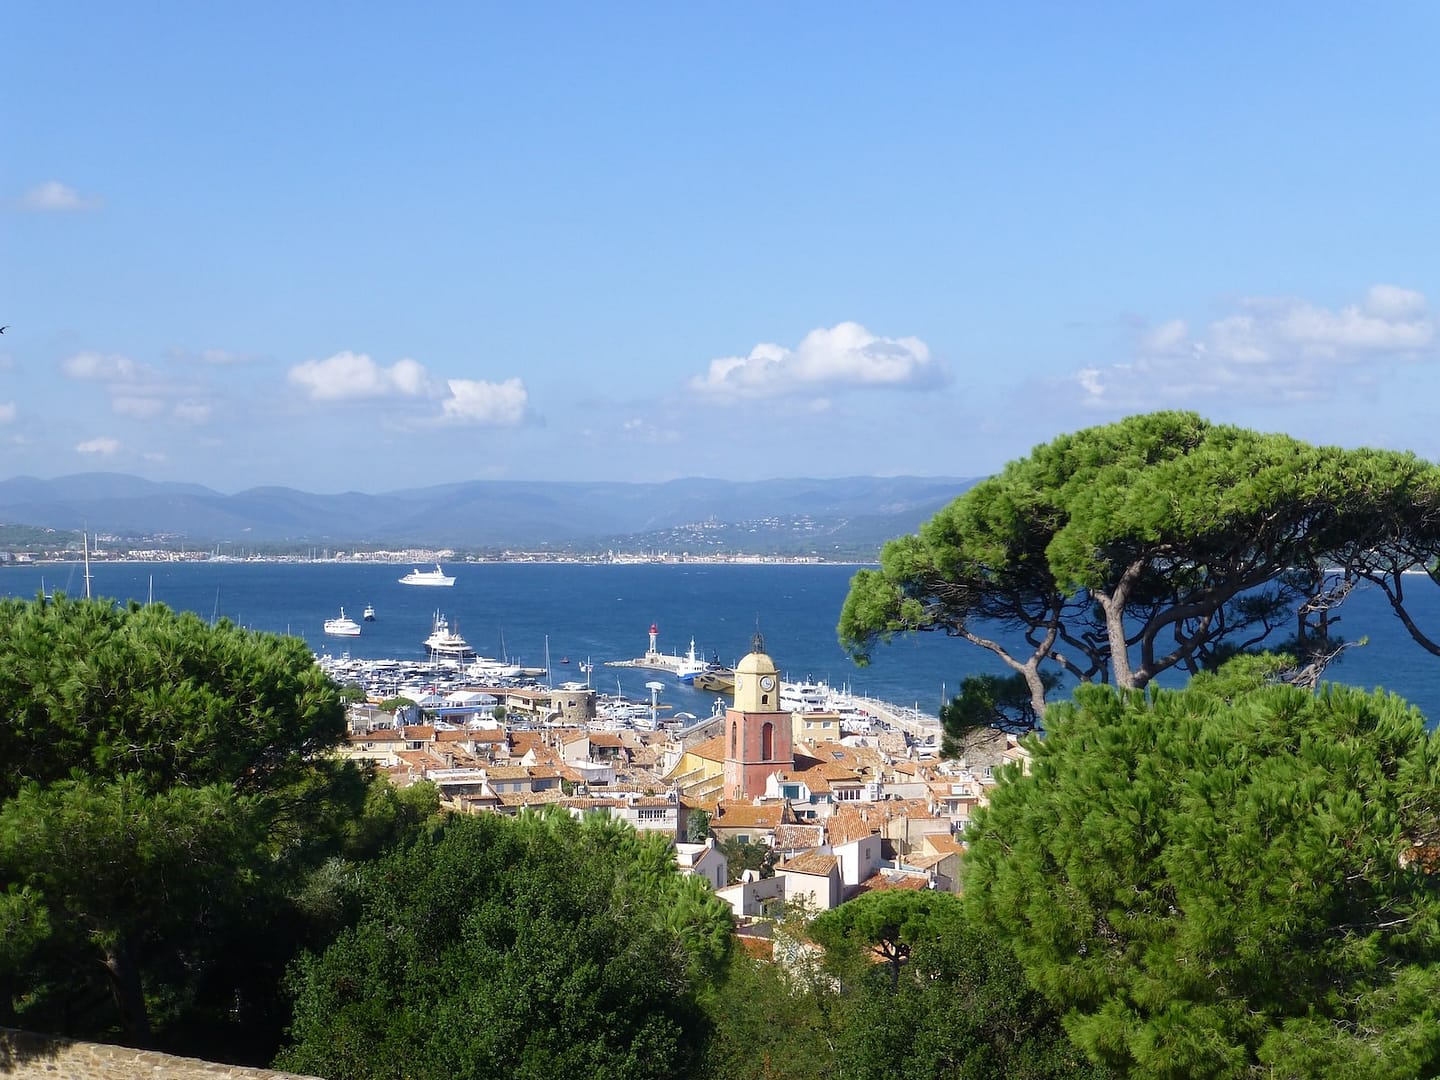 Top 10 things to do and see in Saint-Tropez, France – travel guide 2023